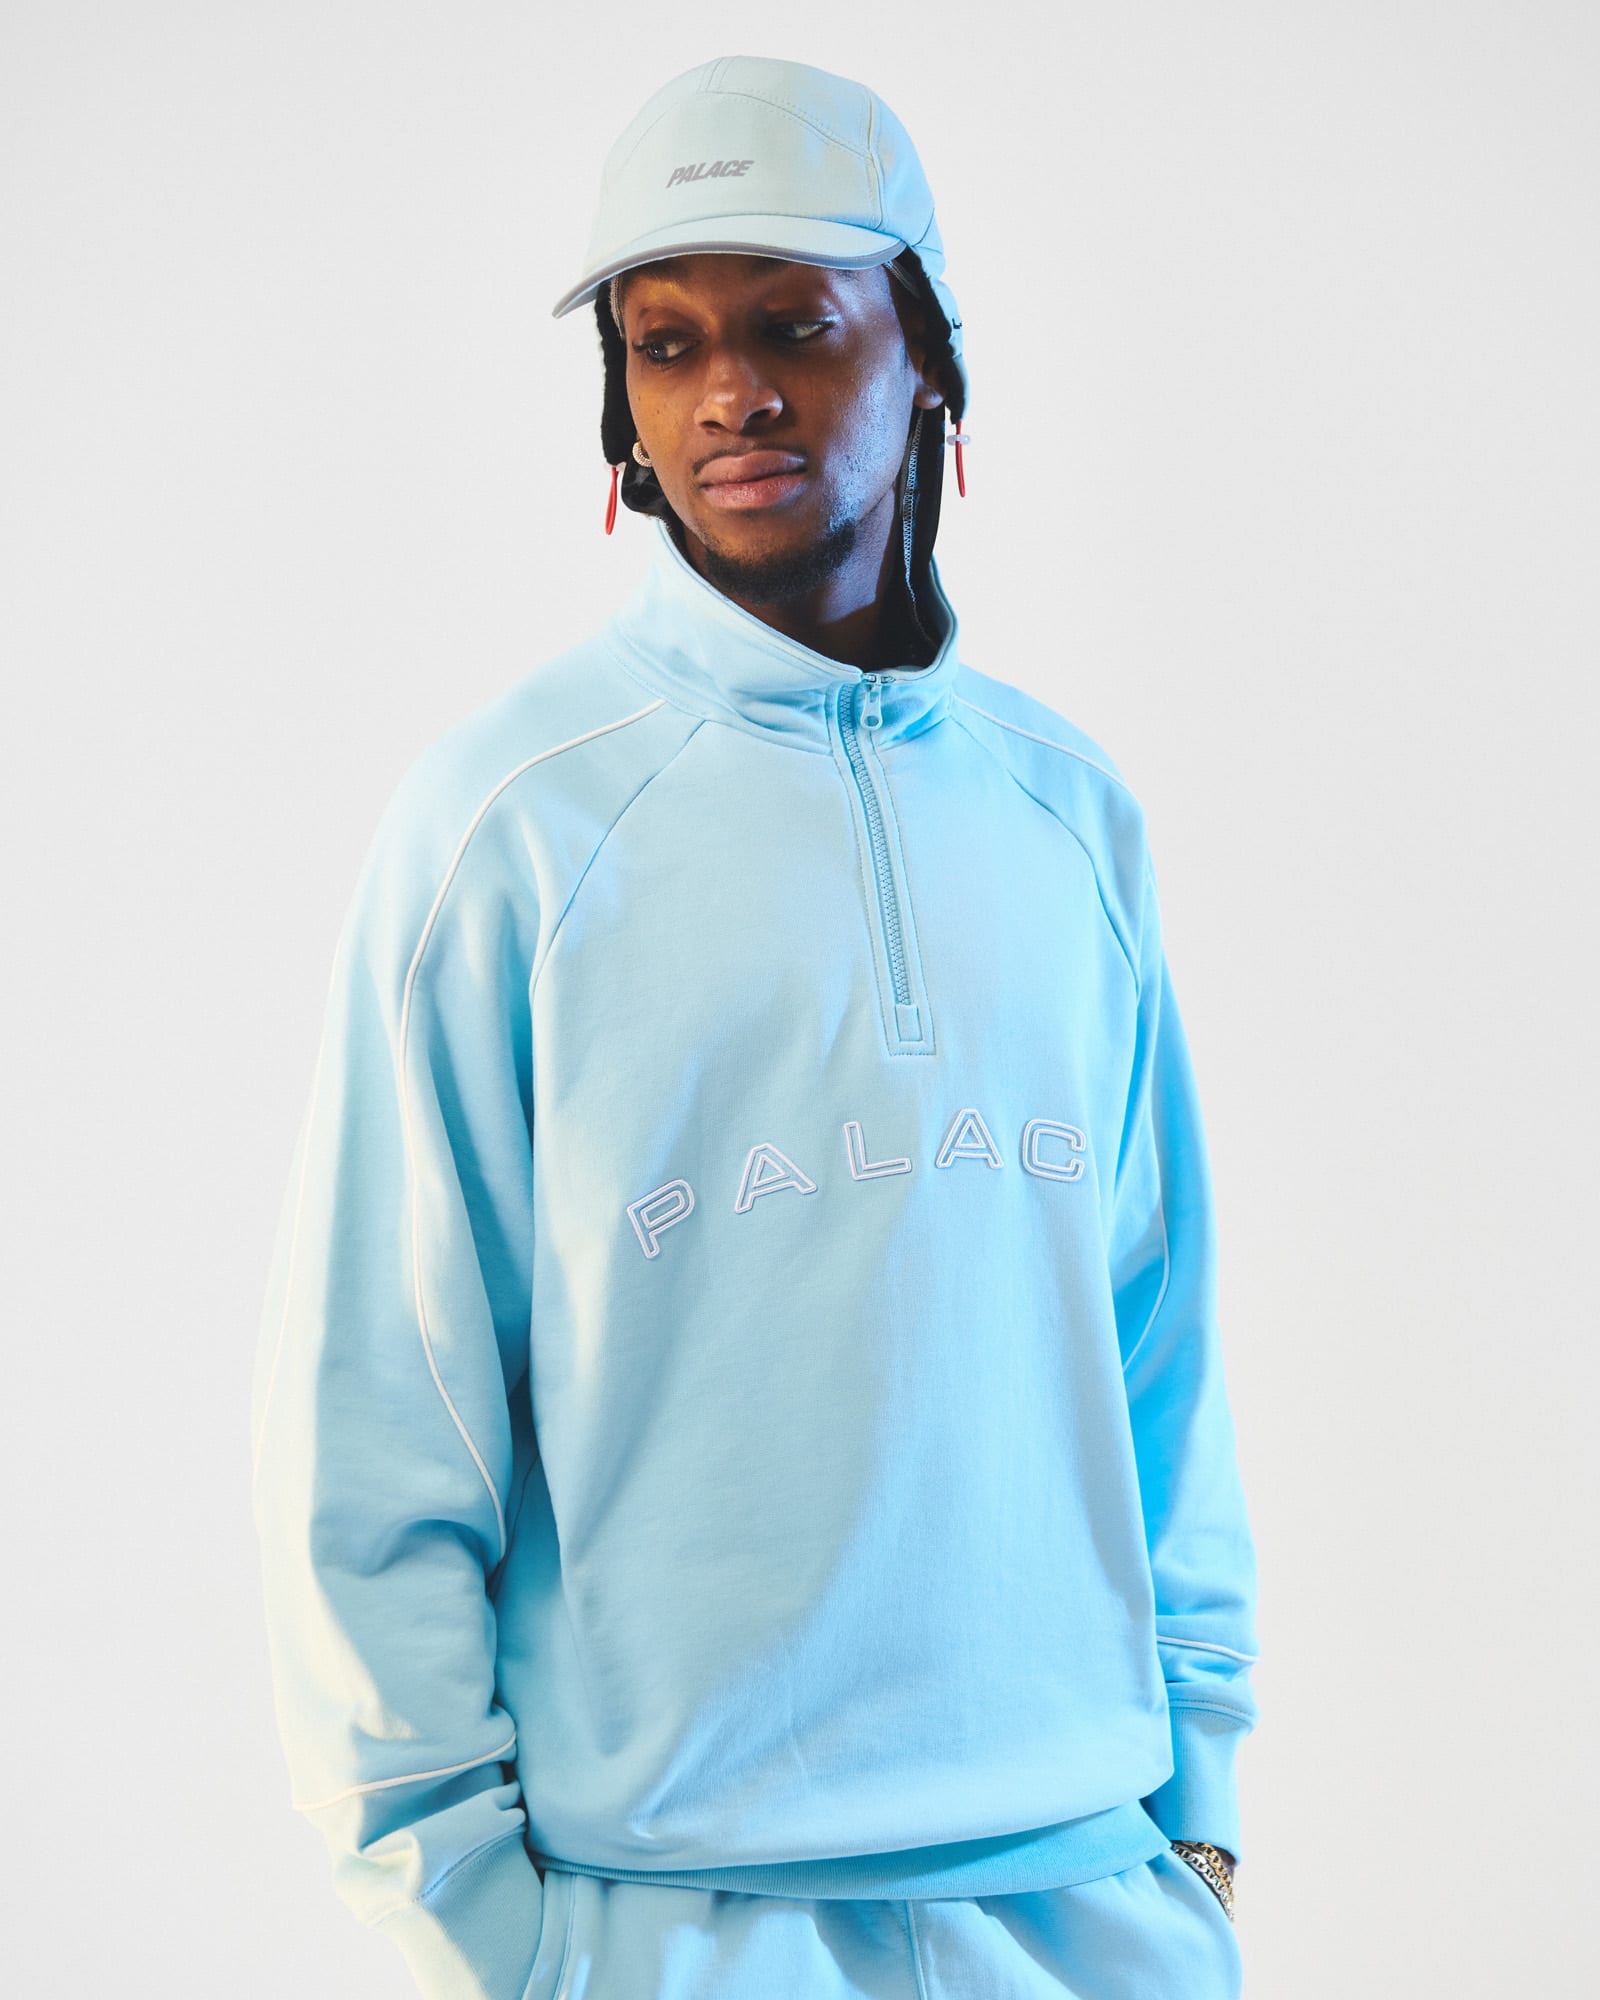 Palace lookbook model pictured